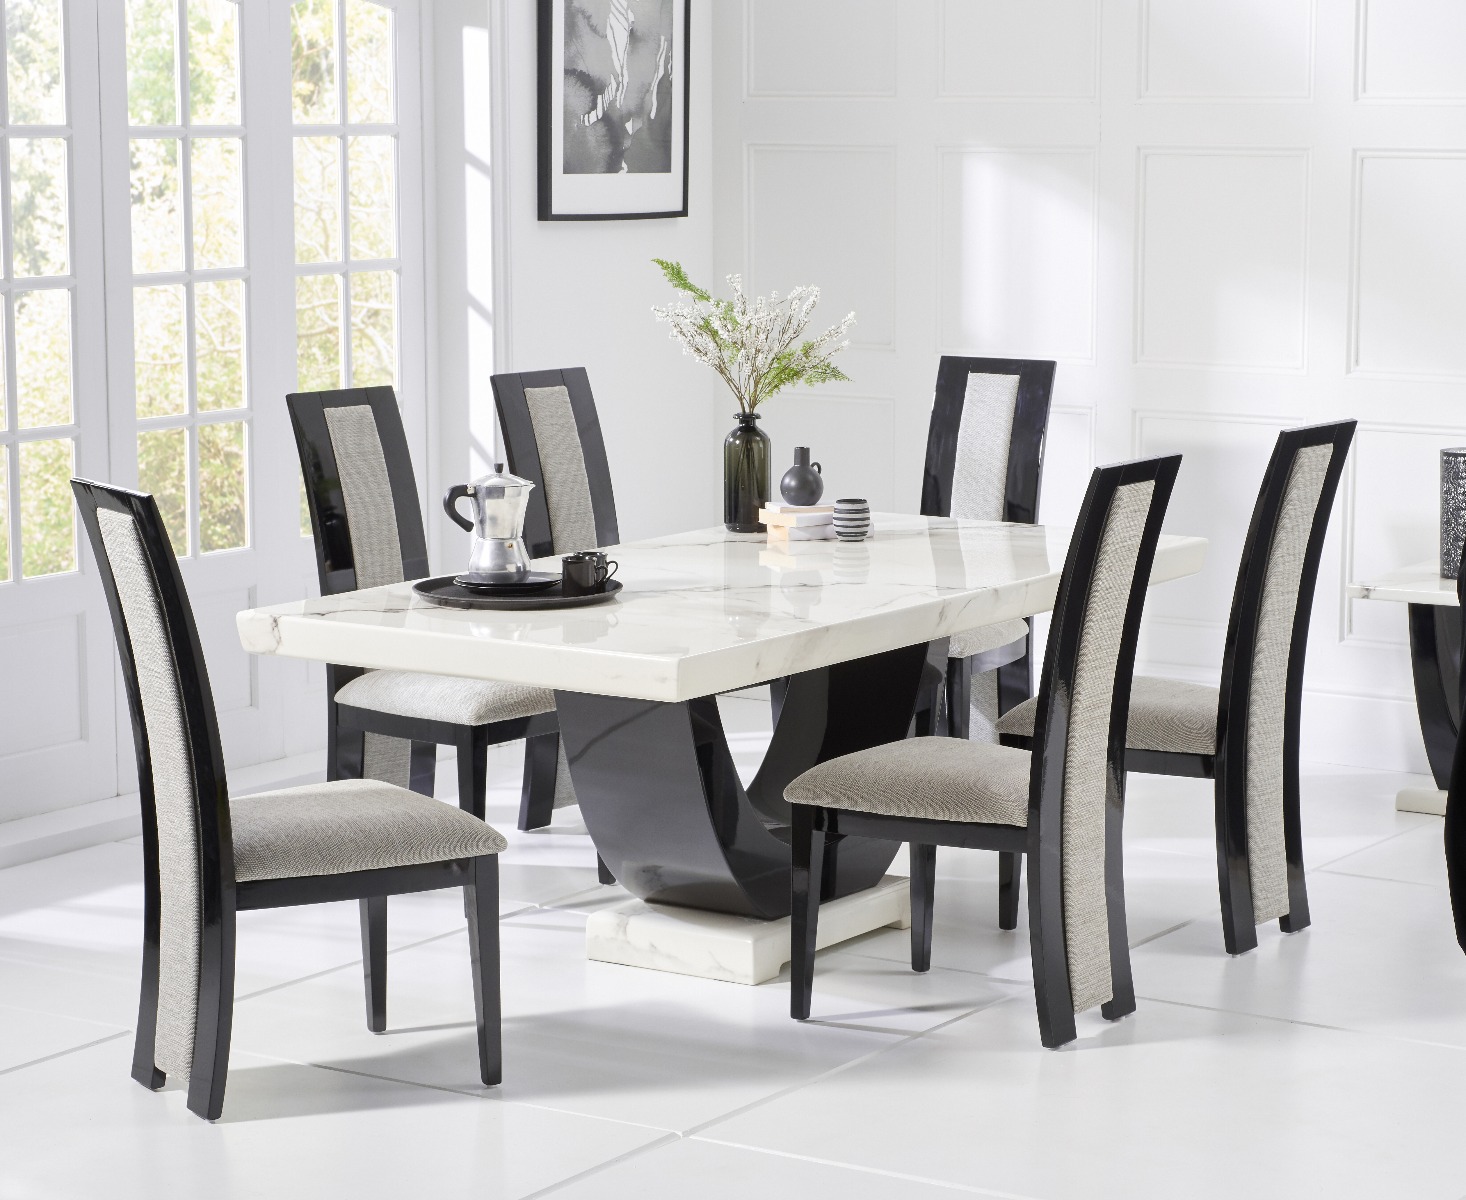 Raphael 200cm White Pedestal Marble Dining Table With Raphael Chairs